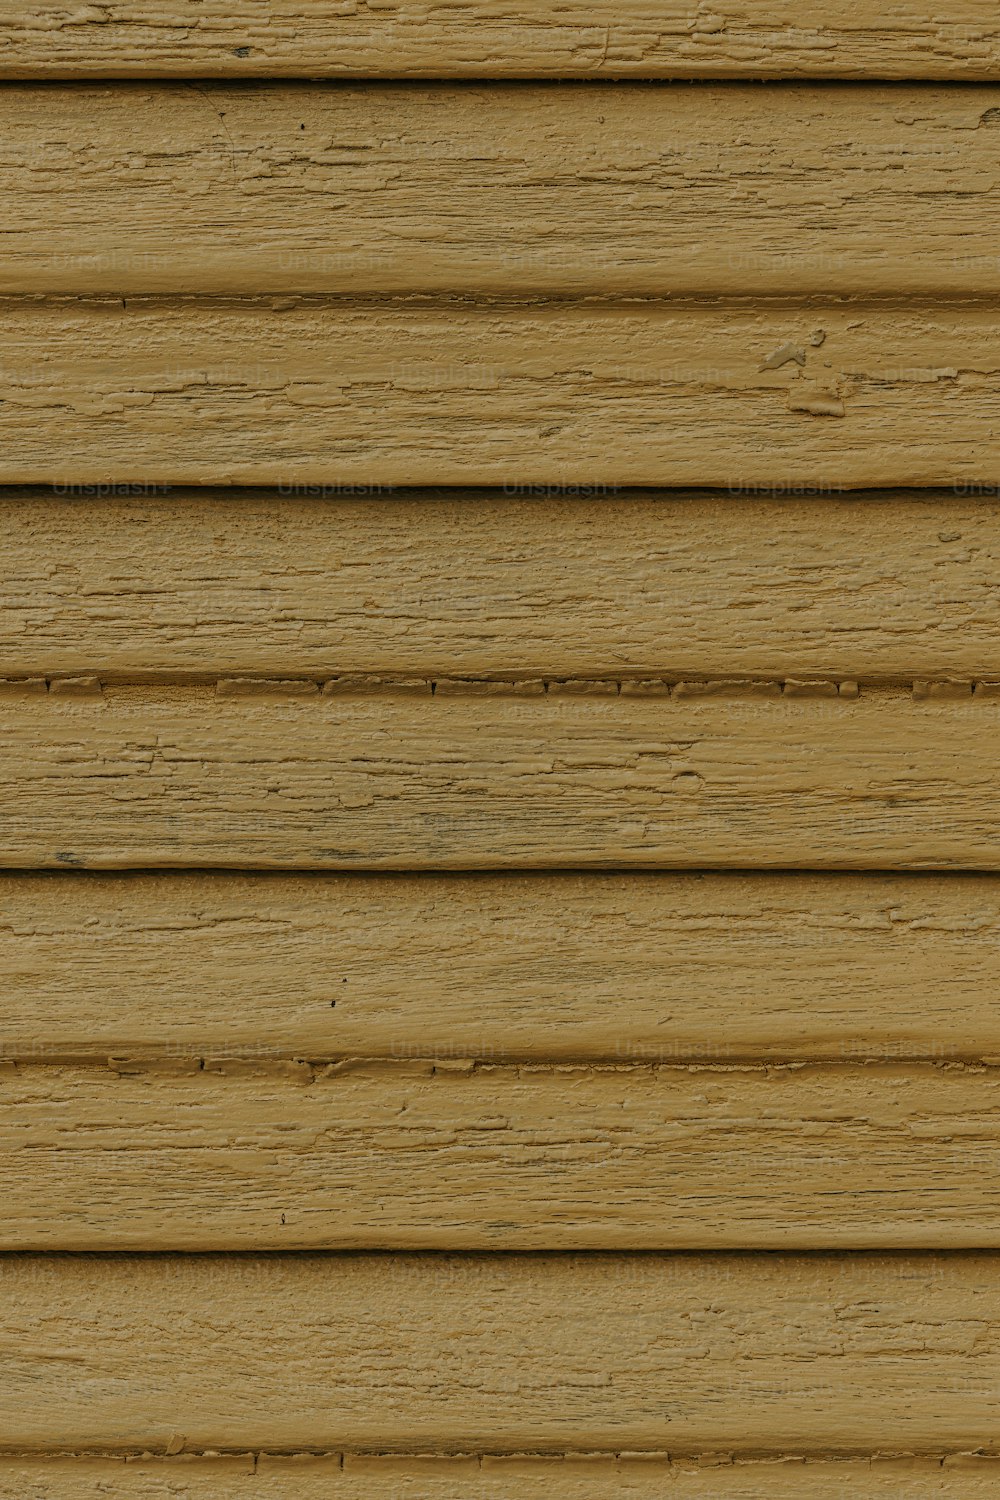 a close up view of a wooden siding